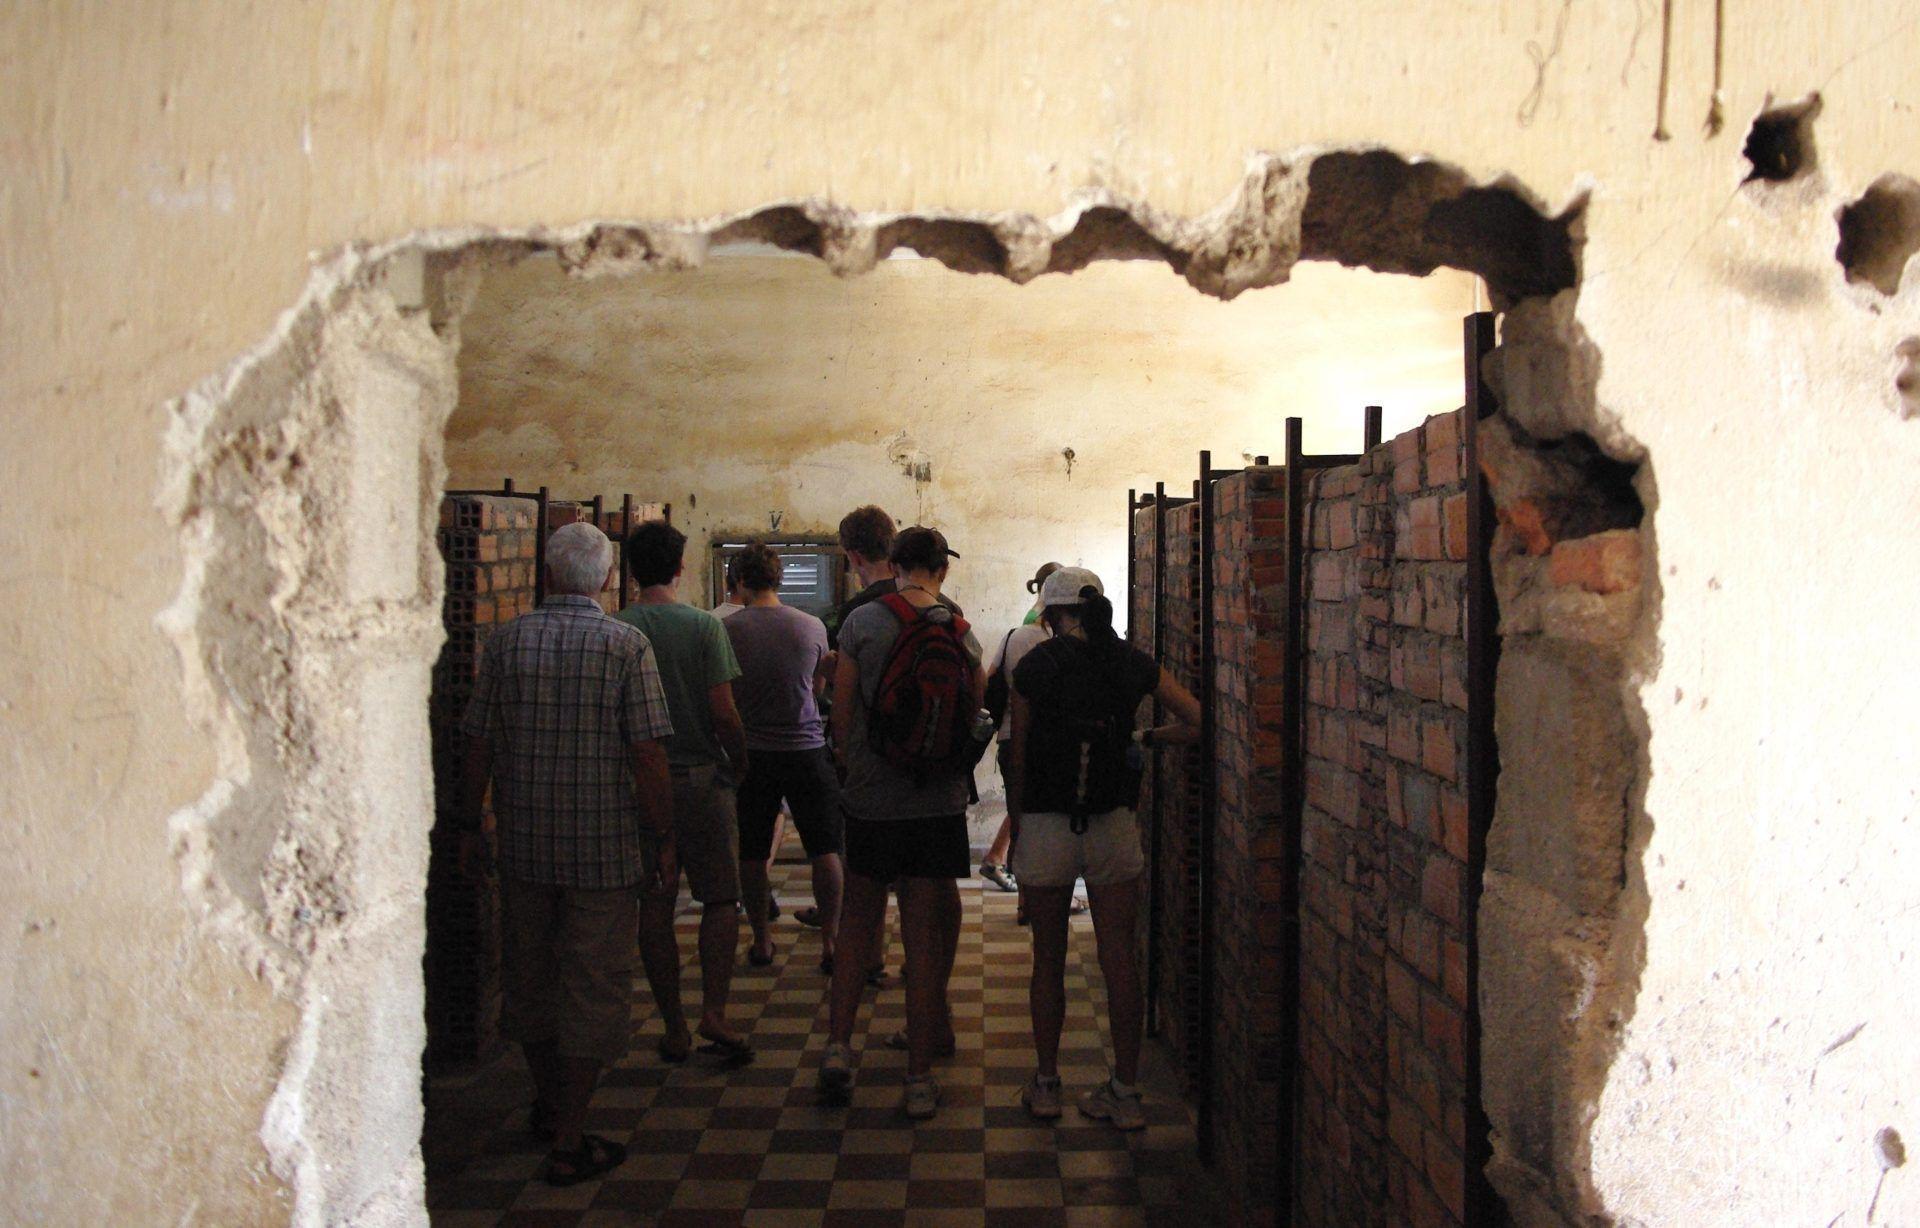 S-21 - The Prison that is now the Genocide Museum, Phnom Penh